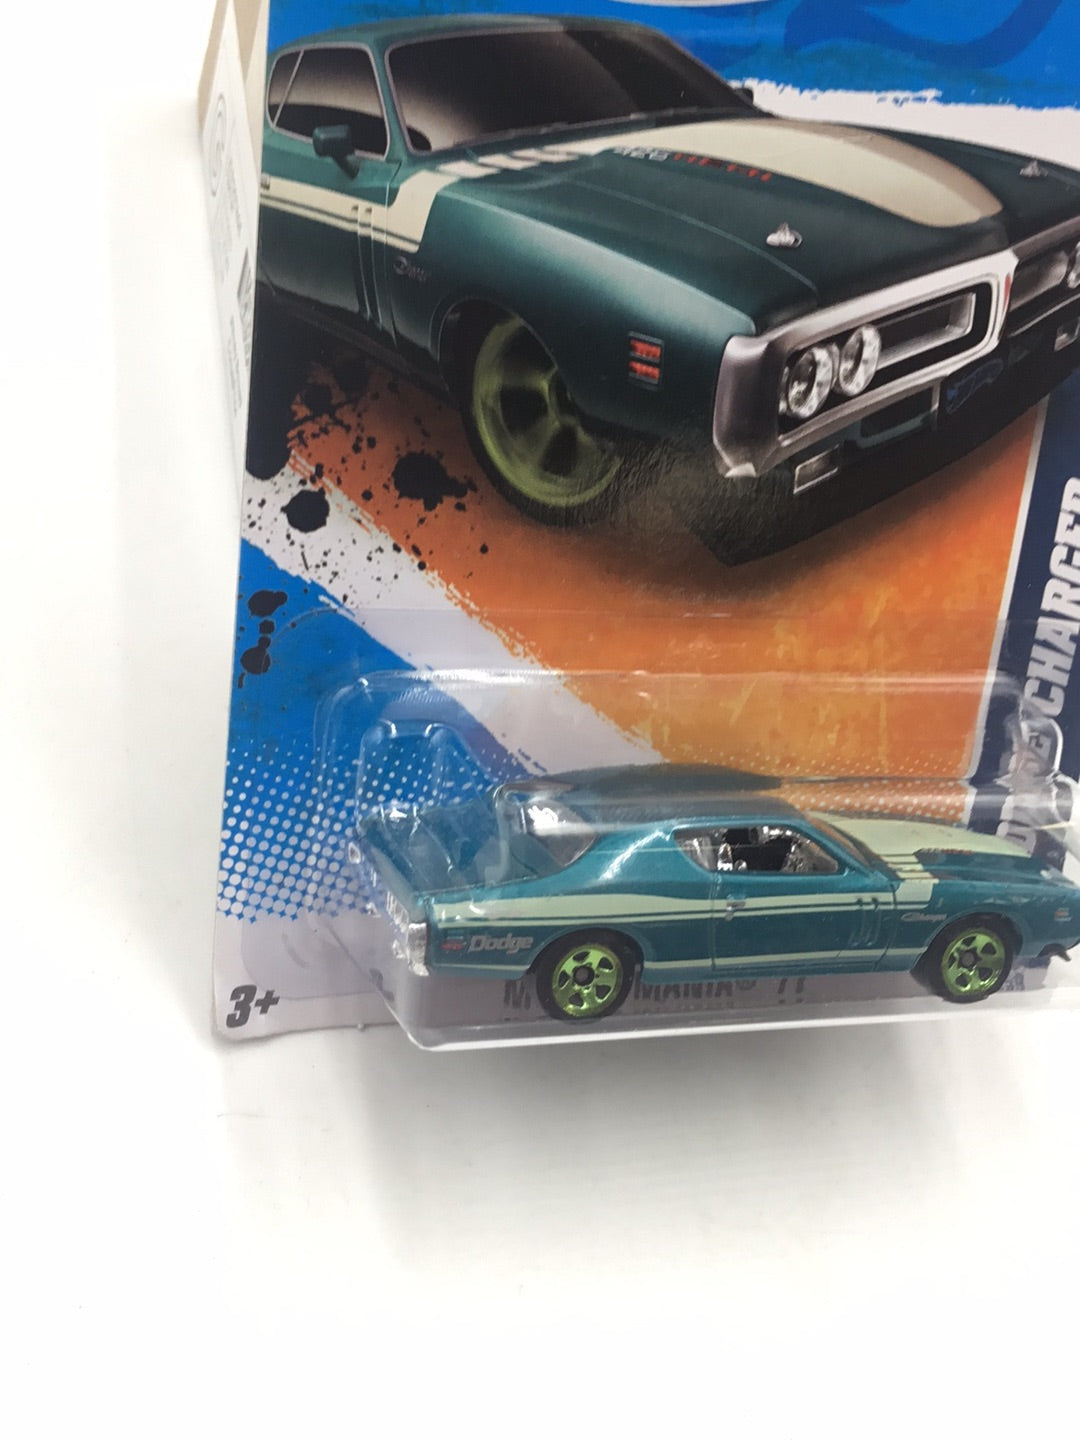 2011 Hot Wheels #108 71 Dodge Charger GG4